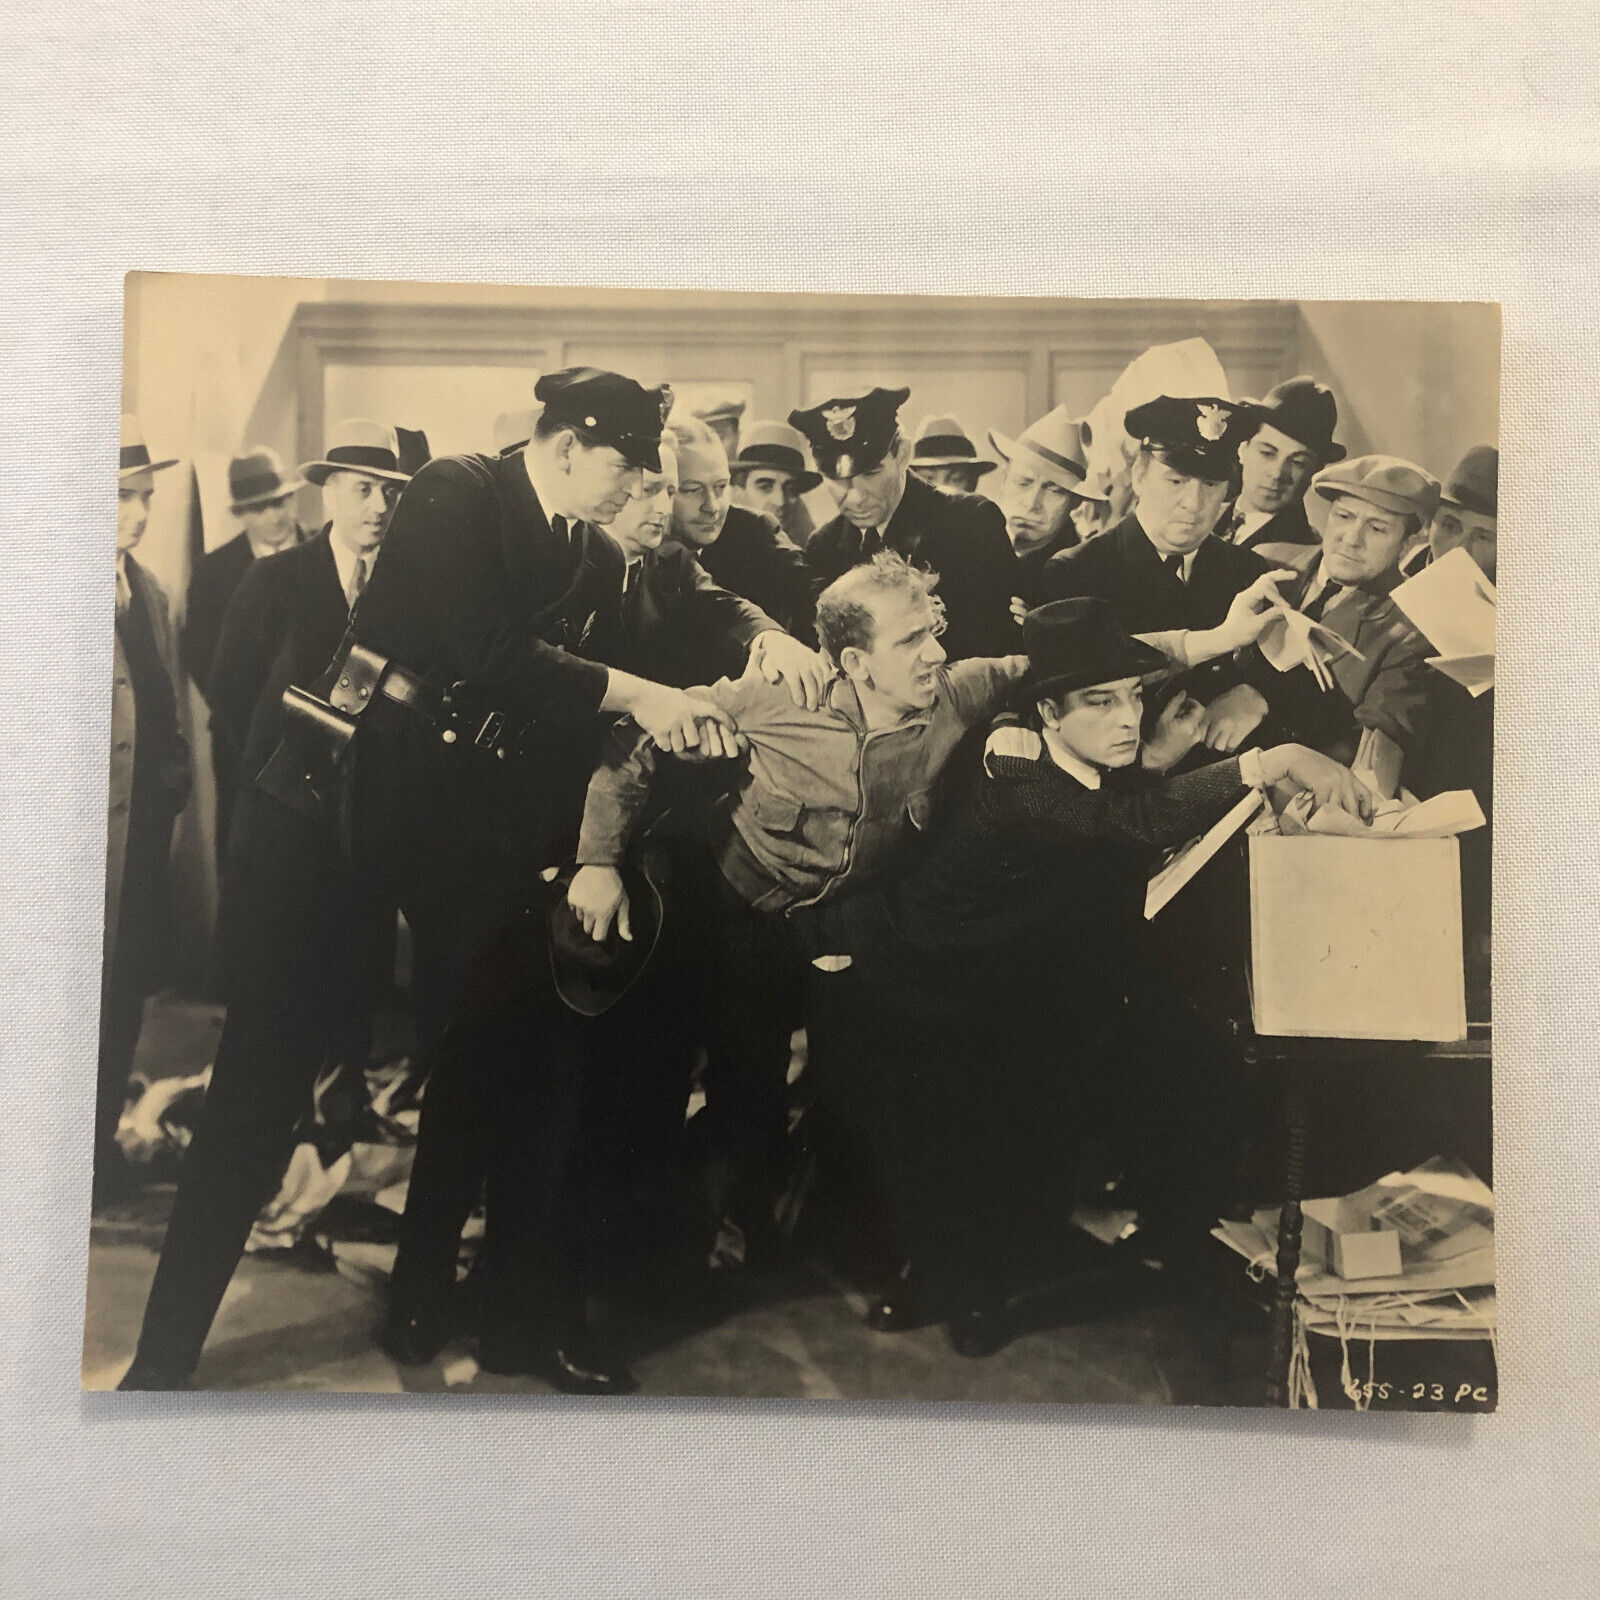 Buster Keaton Jimmy Durante What No Beer Comedy Film Movie Photo Photograph